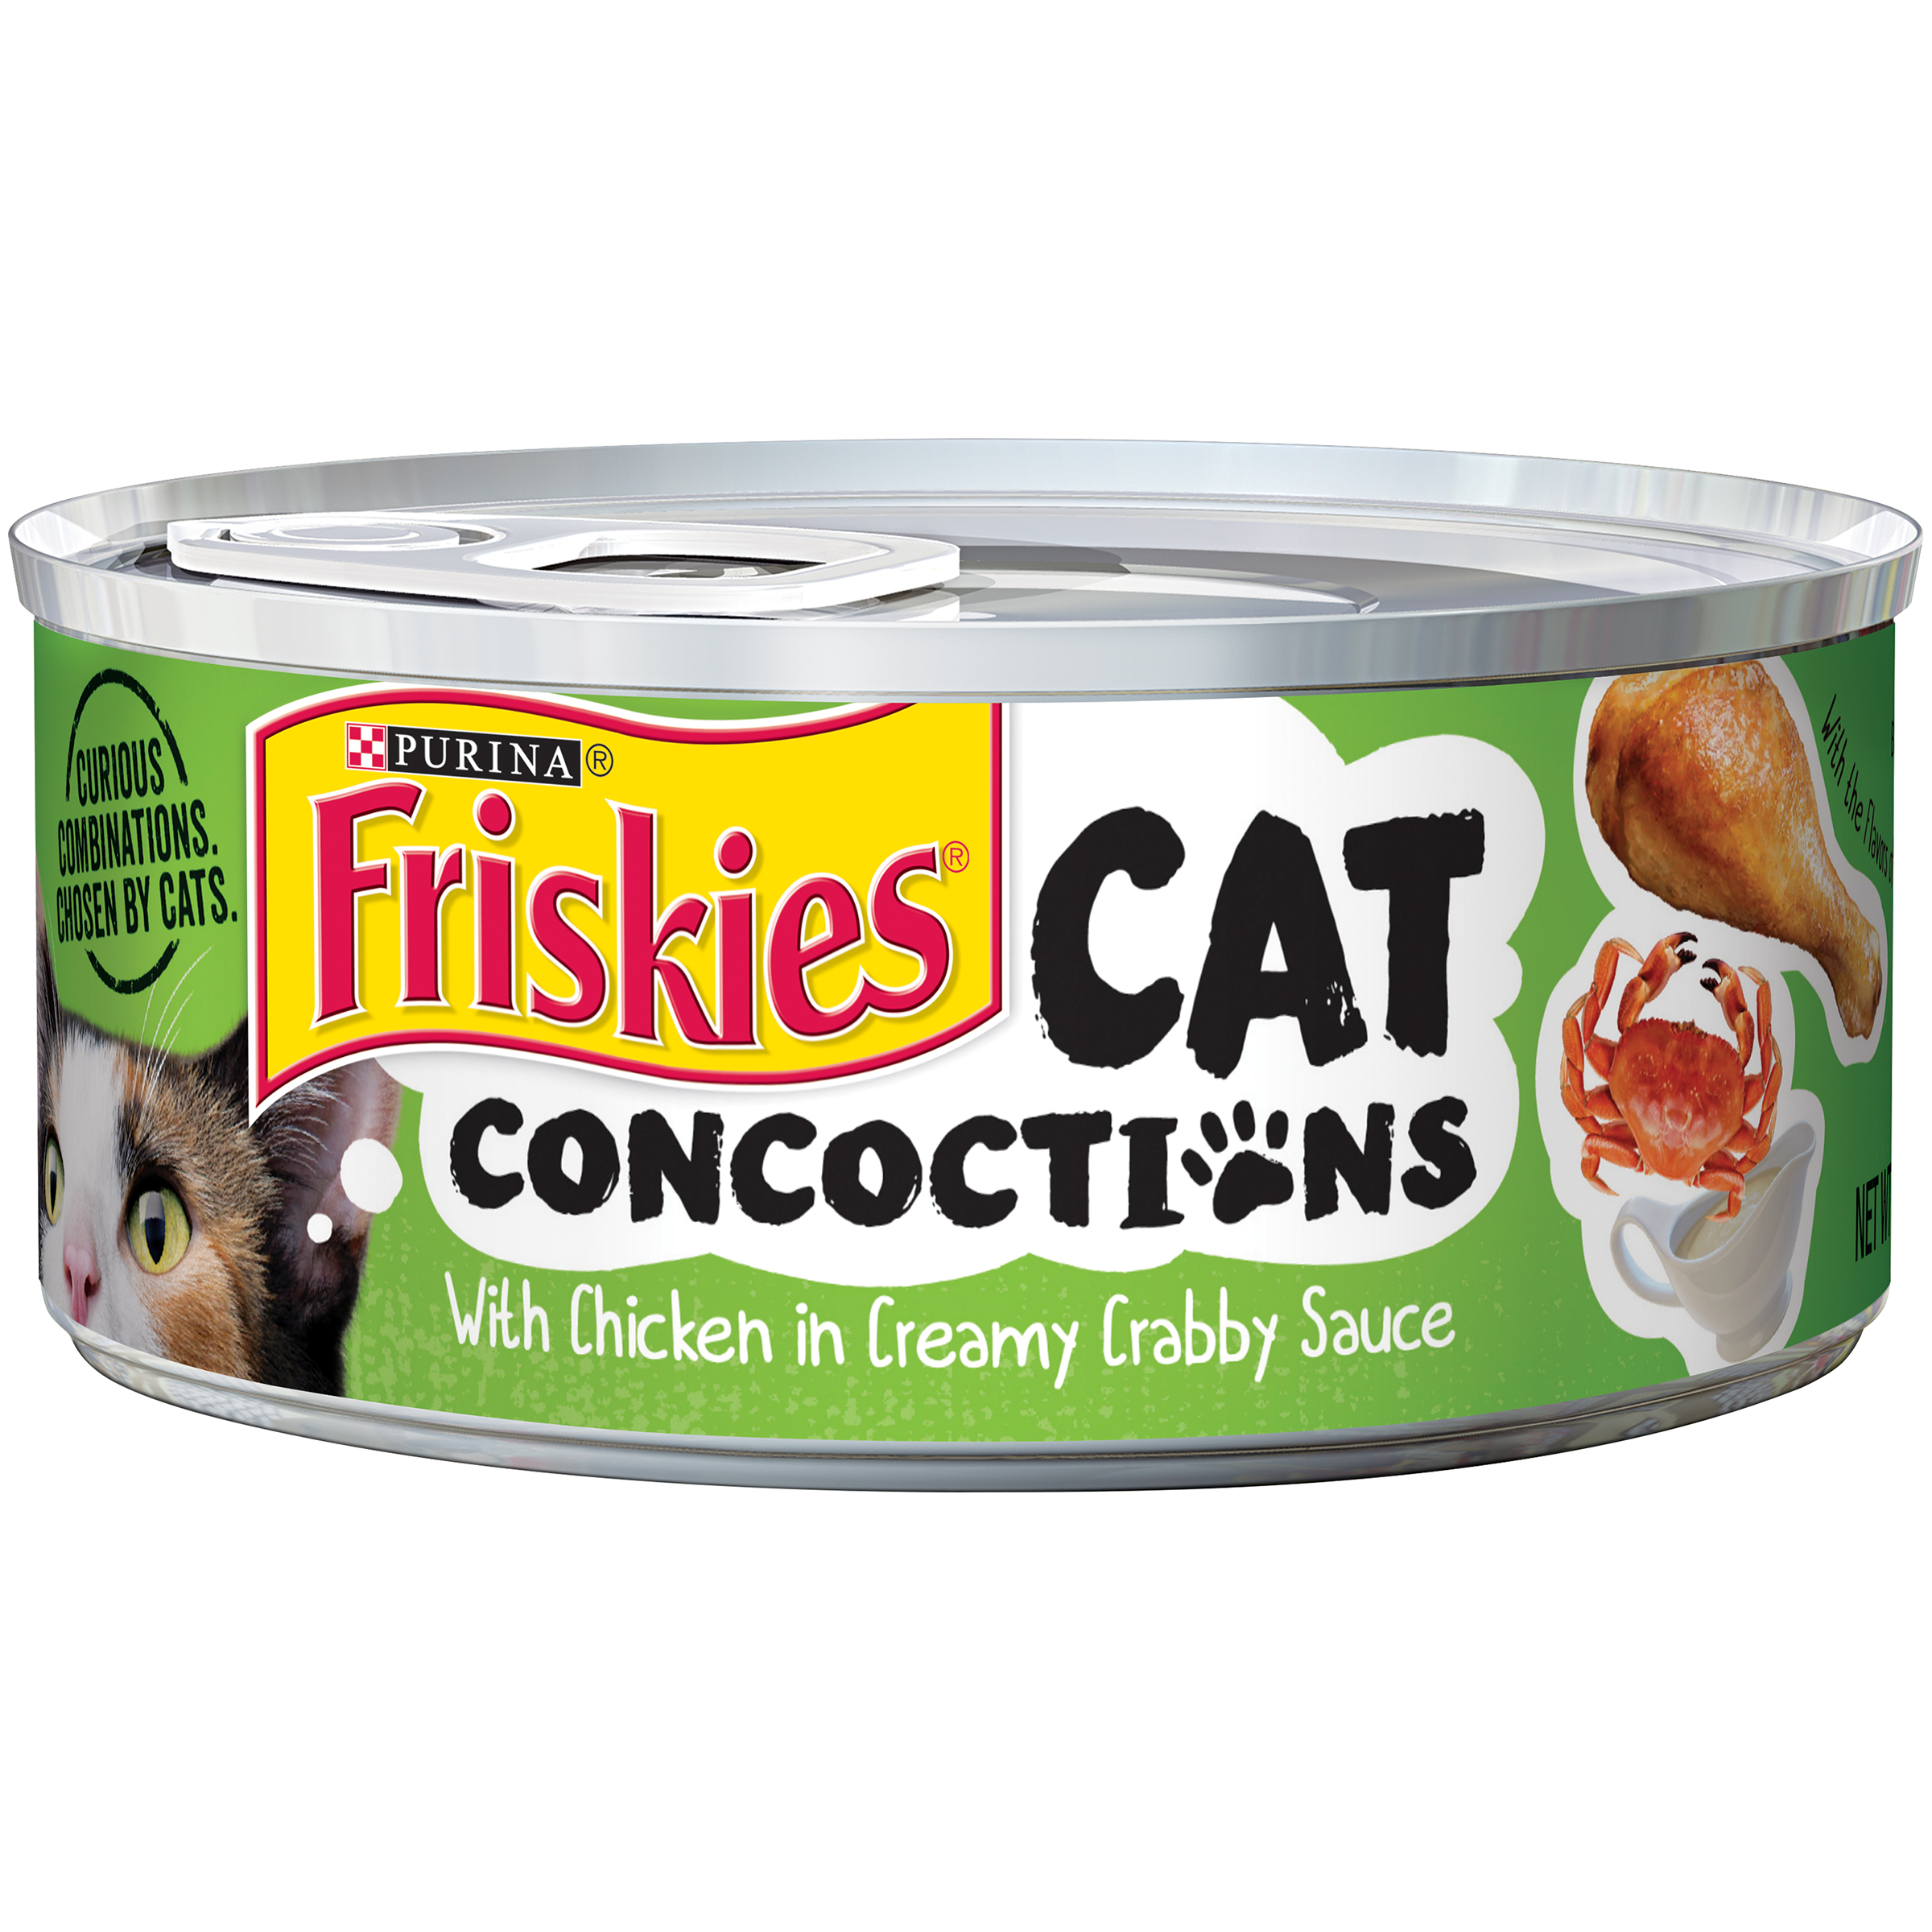 0050000962822 - CAT CONCOCTIONS WITH CHICKEN IN CREAMY CRABBY SAUCE